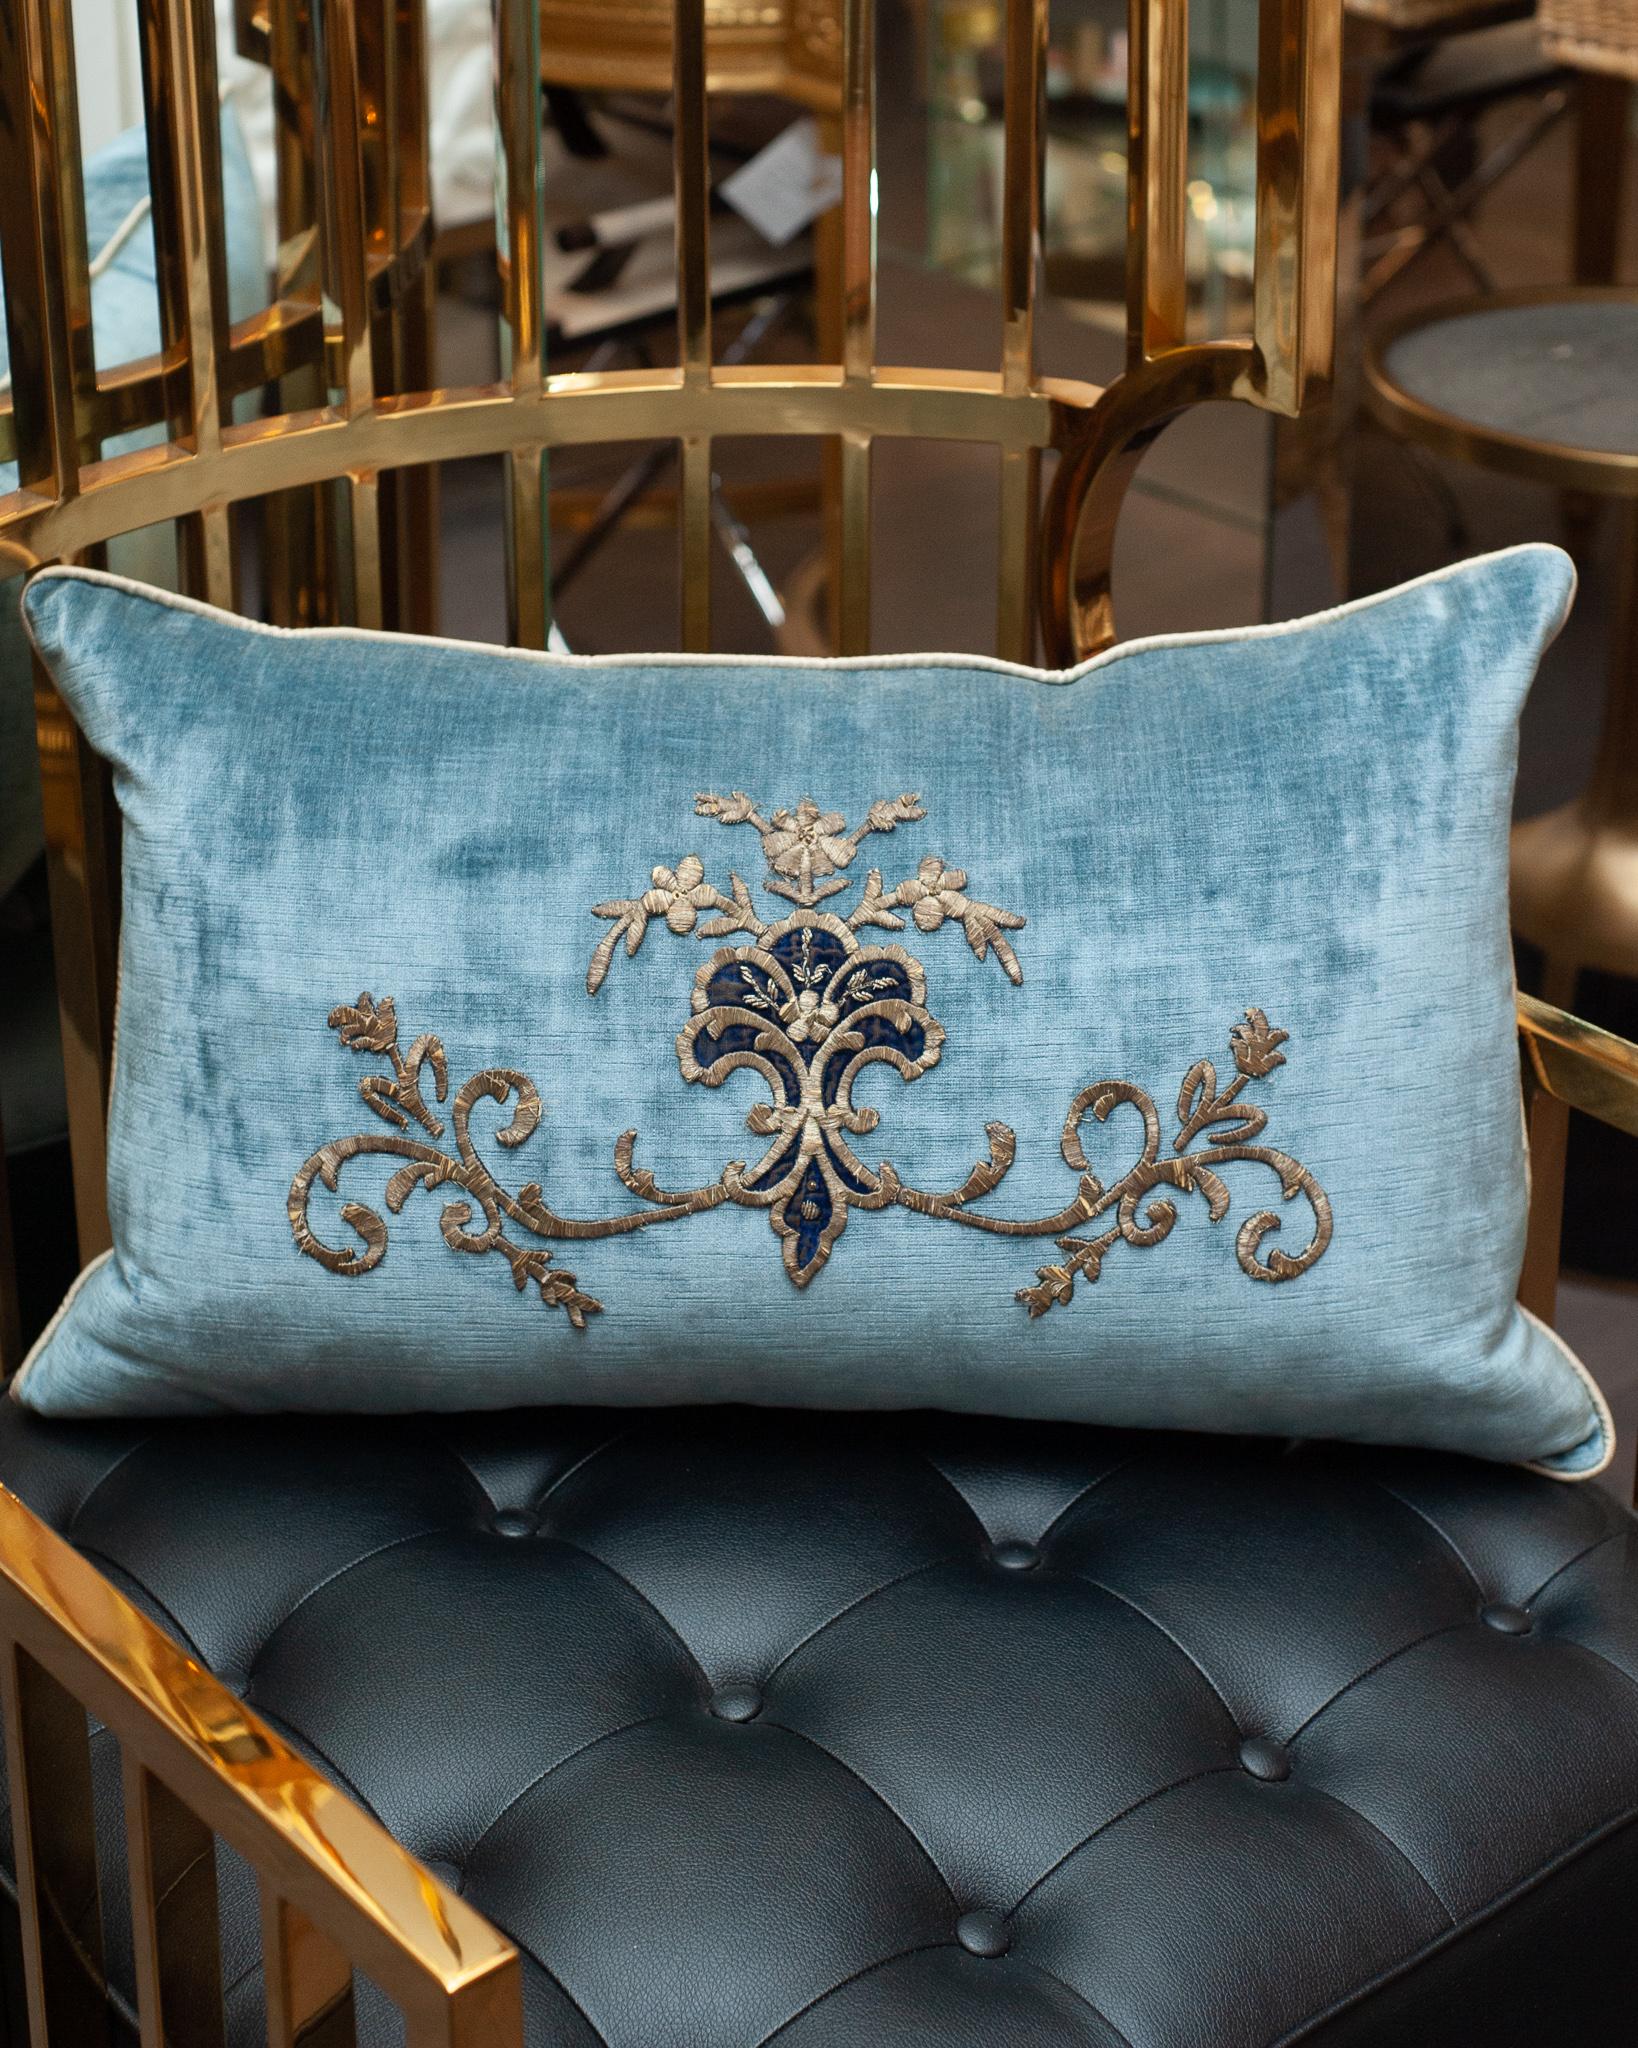 A stunning large blue velvet pillow with hand-stitched Antique Ottoman metallic embroidery. Filled with a down and feather insert for a pillow that is as soft and luxurious as it is beautiful.